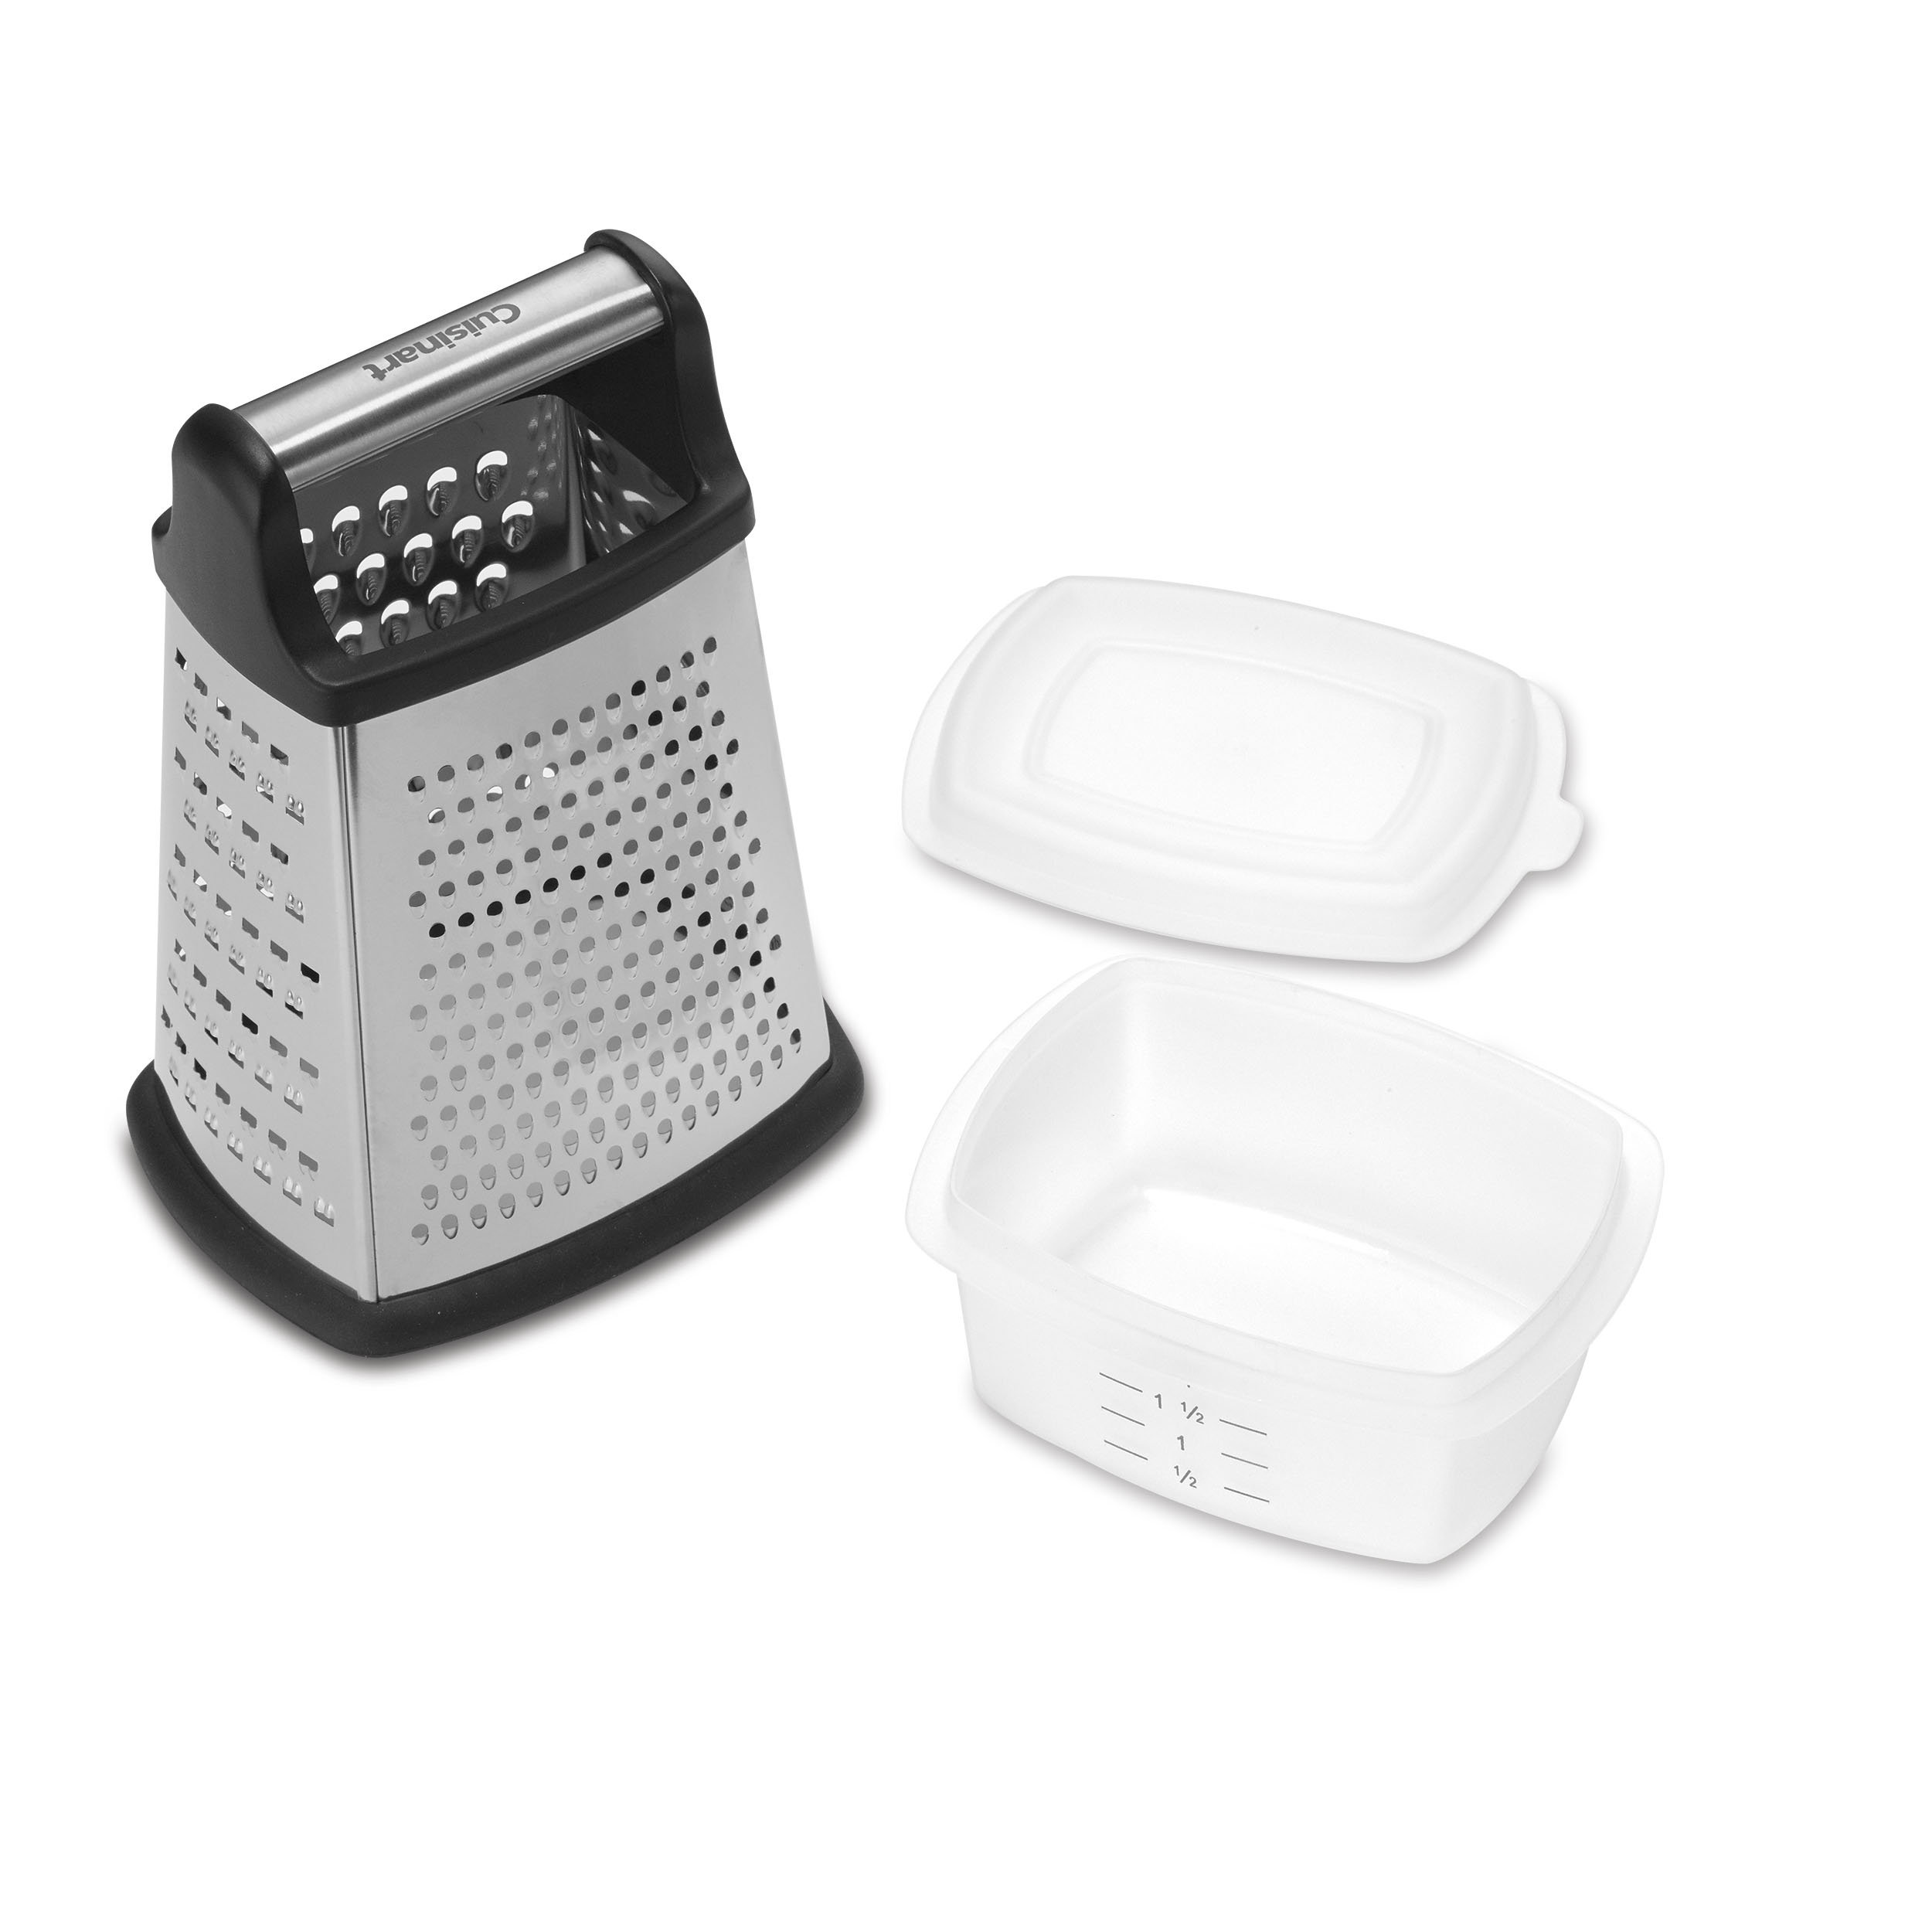 KitchenAid Box Grater with 2 Catch Bins and Lids